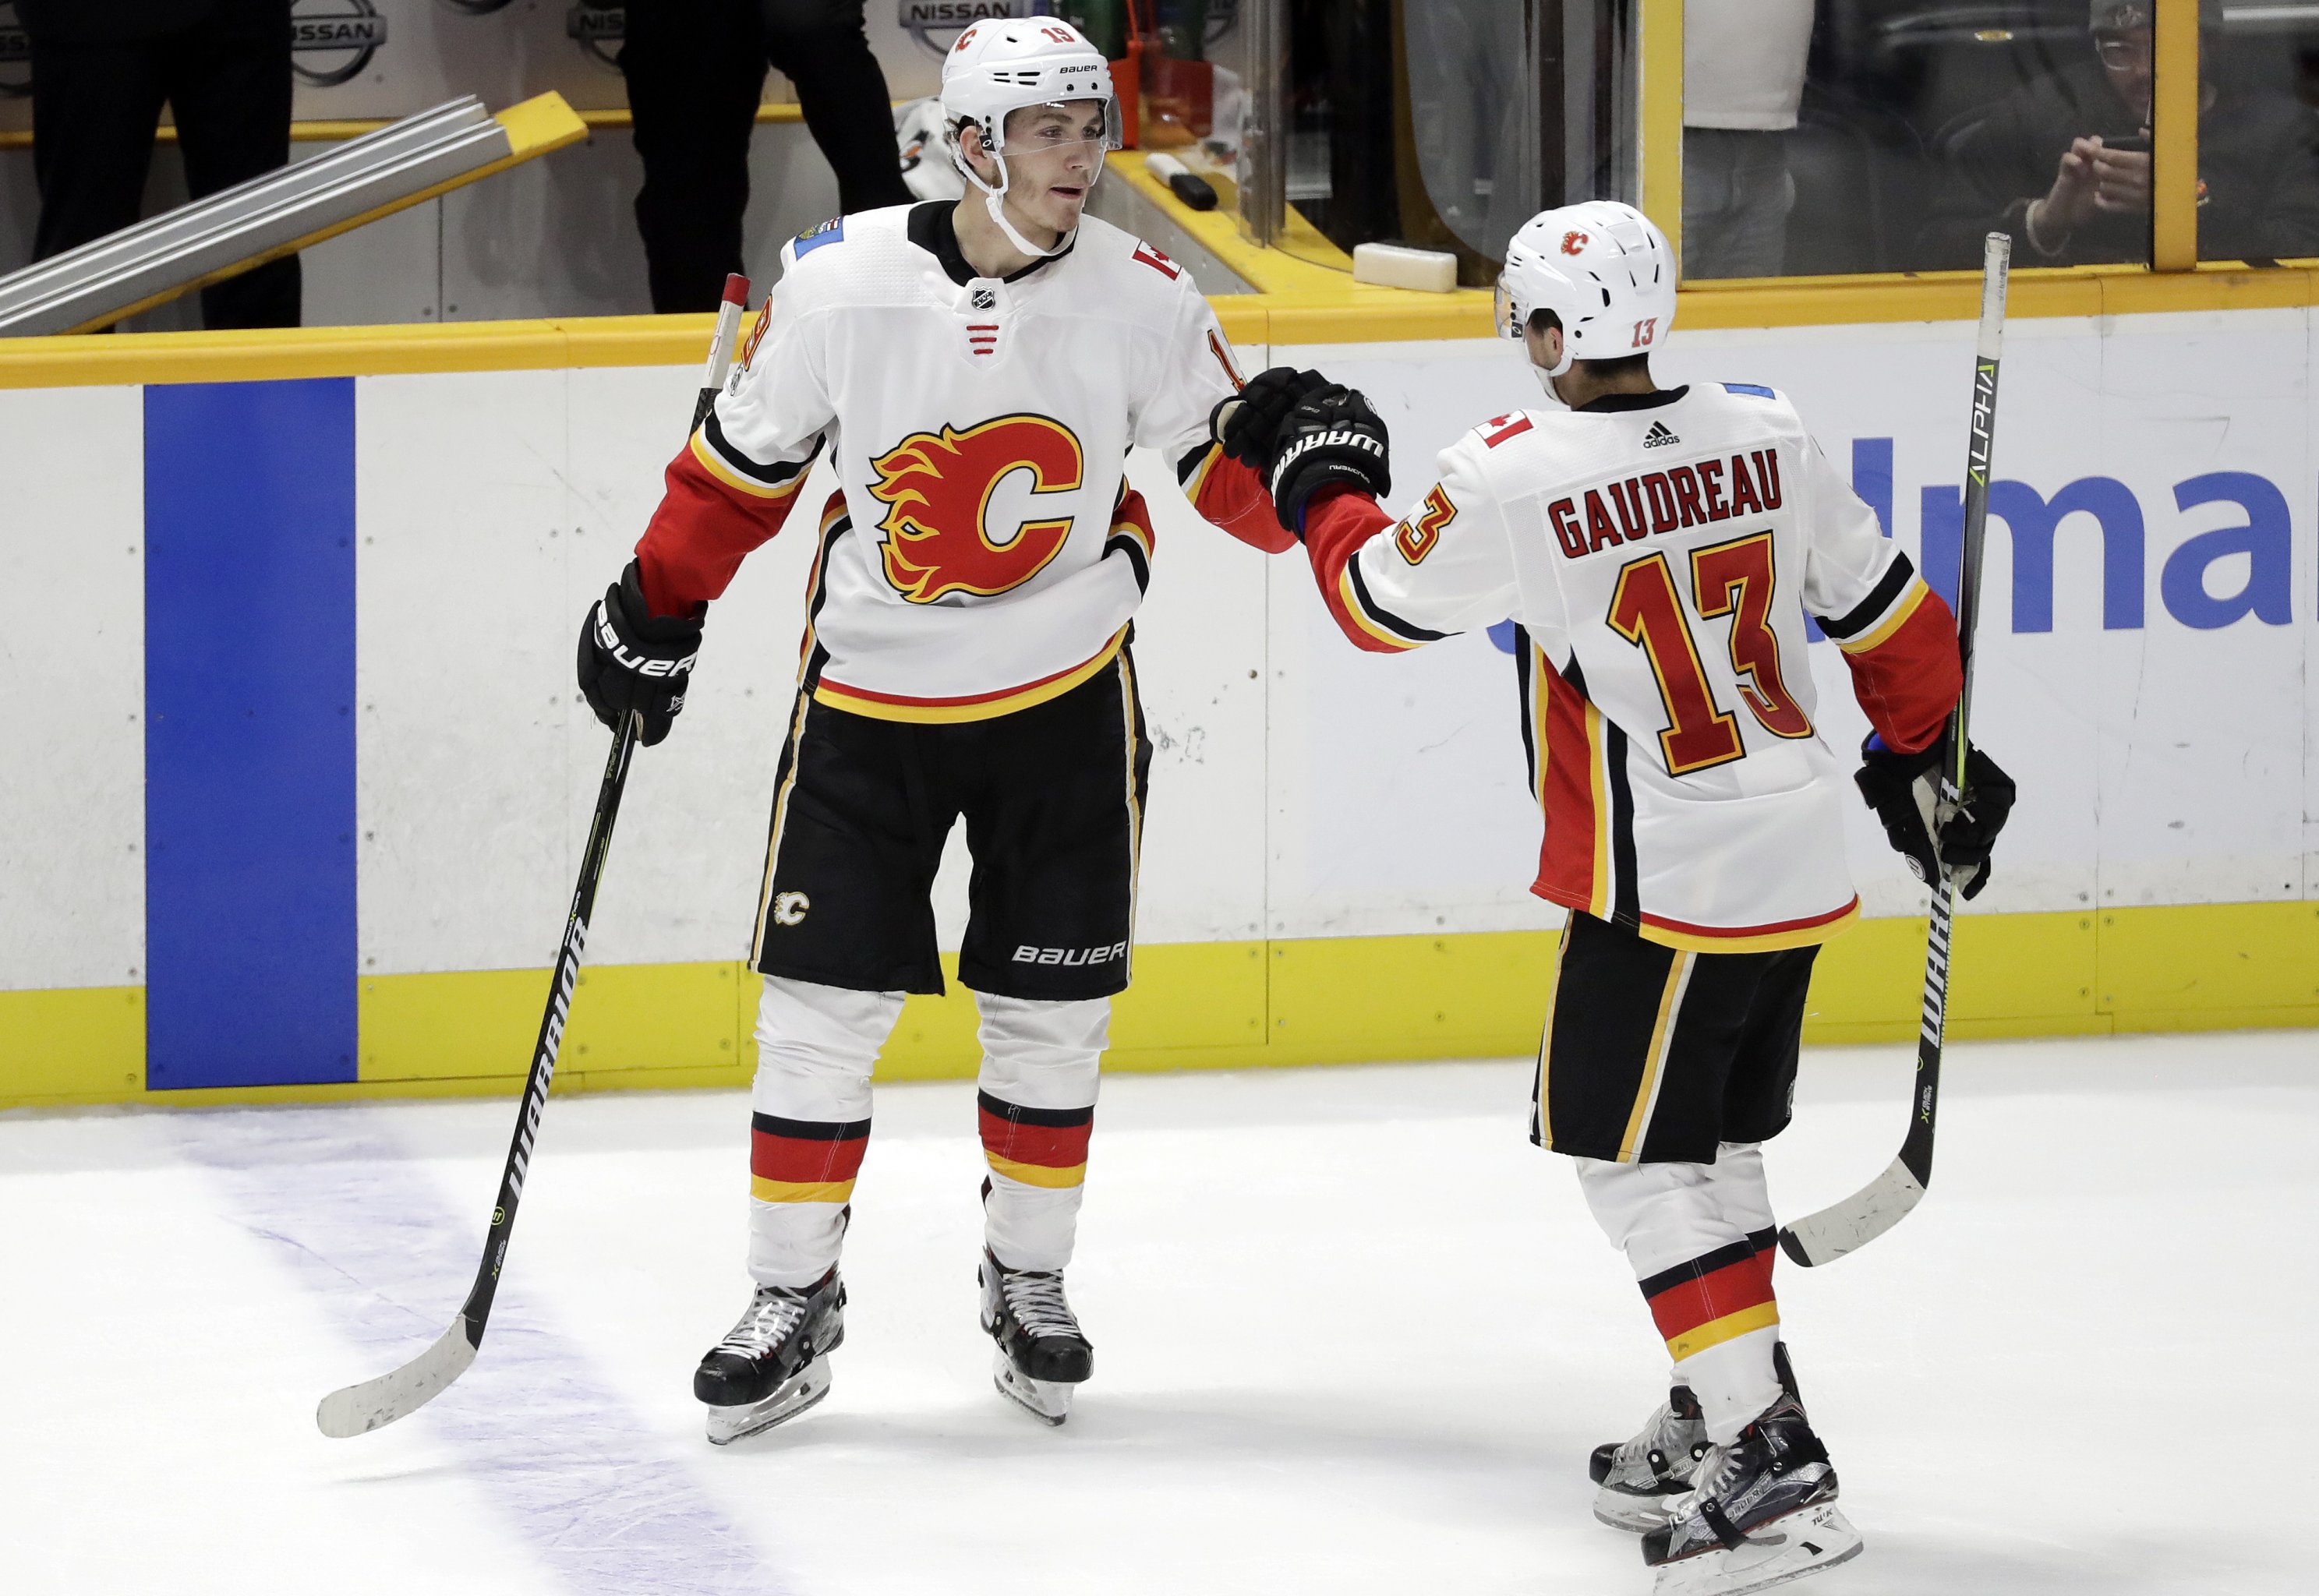 Calgary Flames - 5 years ago today, we drafted these guys. Rasmus